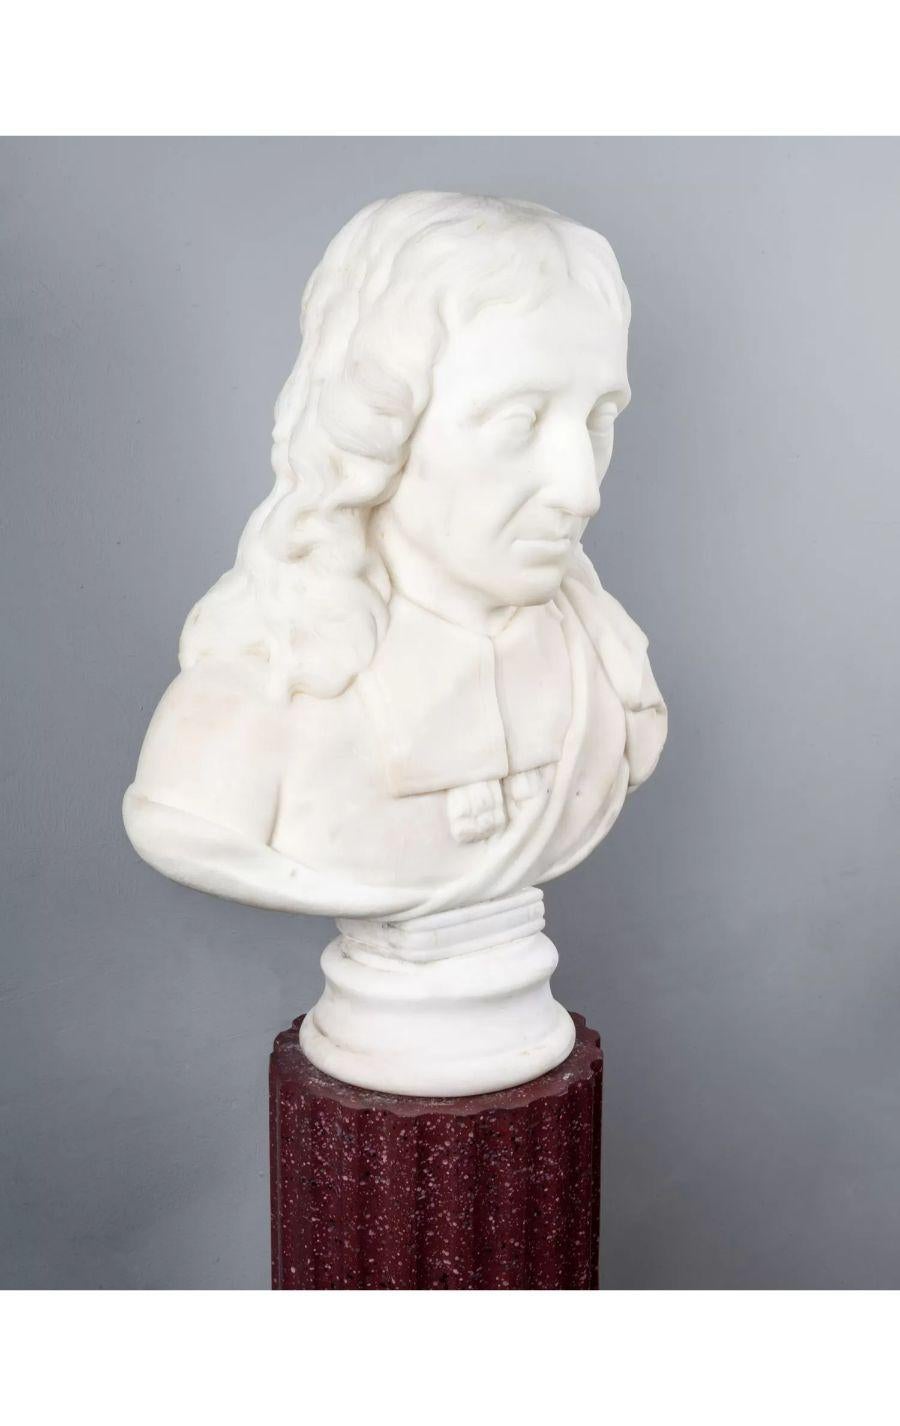 Antique statuary carrara marble bust of John Milton.

Circa 1880

John Milton (9 December 1608 – 8 November 1674) was an English poet and civil servant for the Commonwealth of England under Oliver Cromwell. He wrote at a time of religious flux